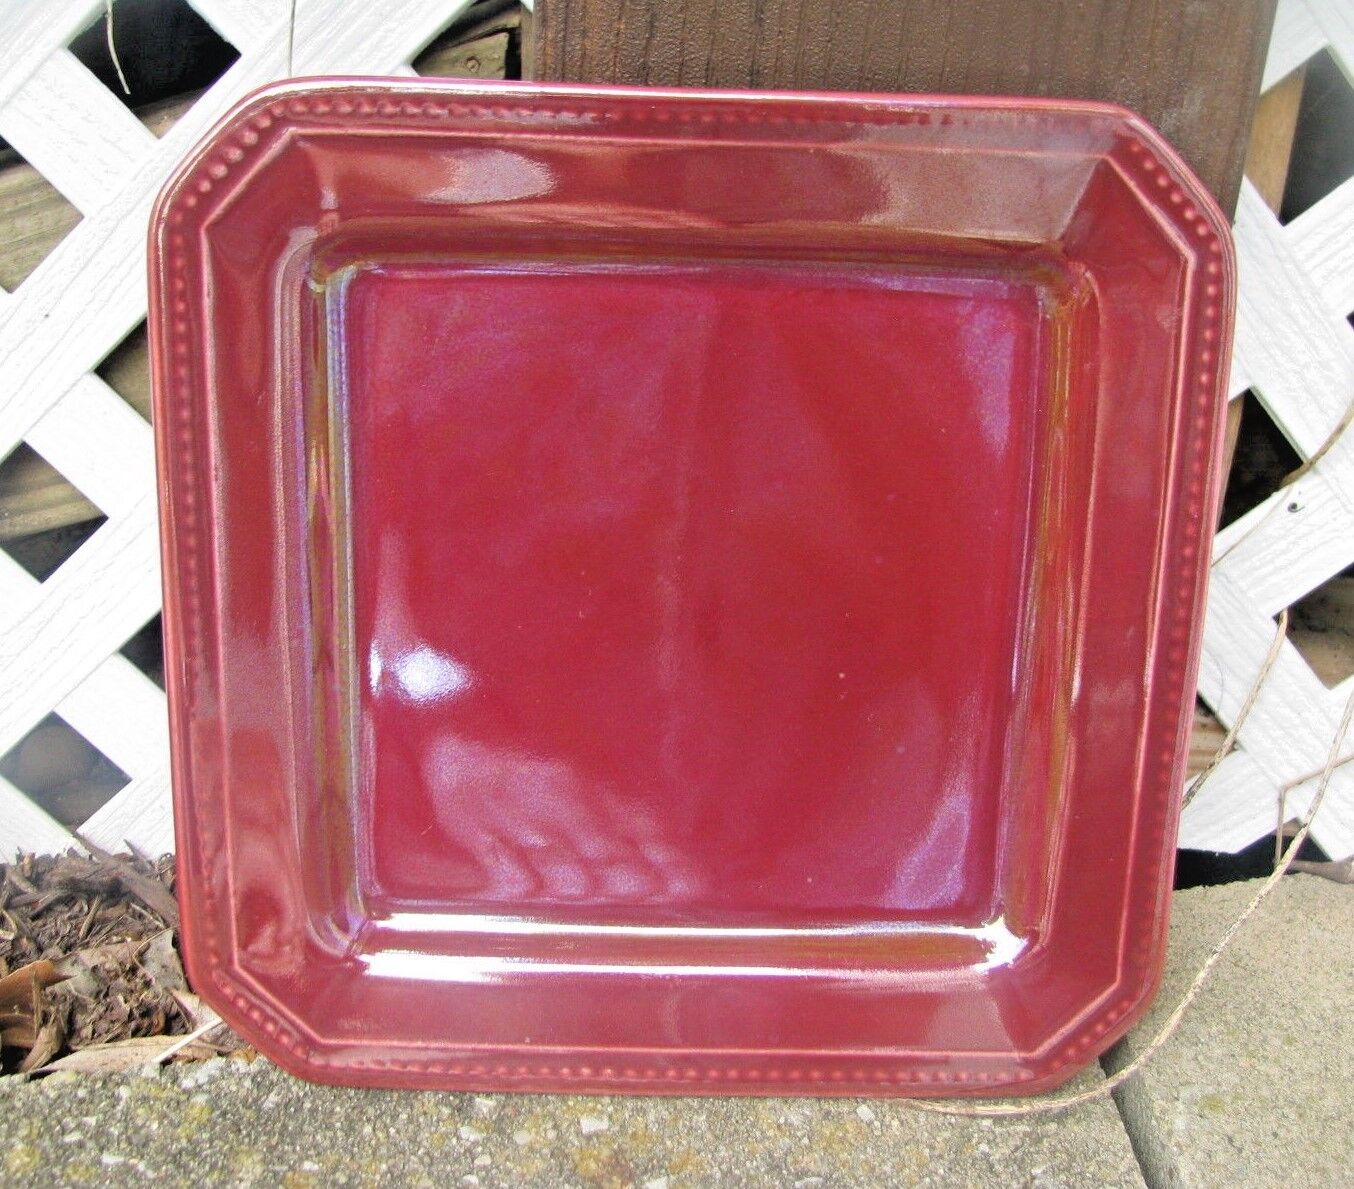 HARTSTONE POTTERY Stoneware OFFer Rectangular Plate of Fran Super Special SALE held Taste from